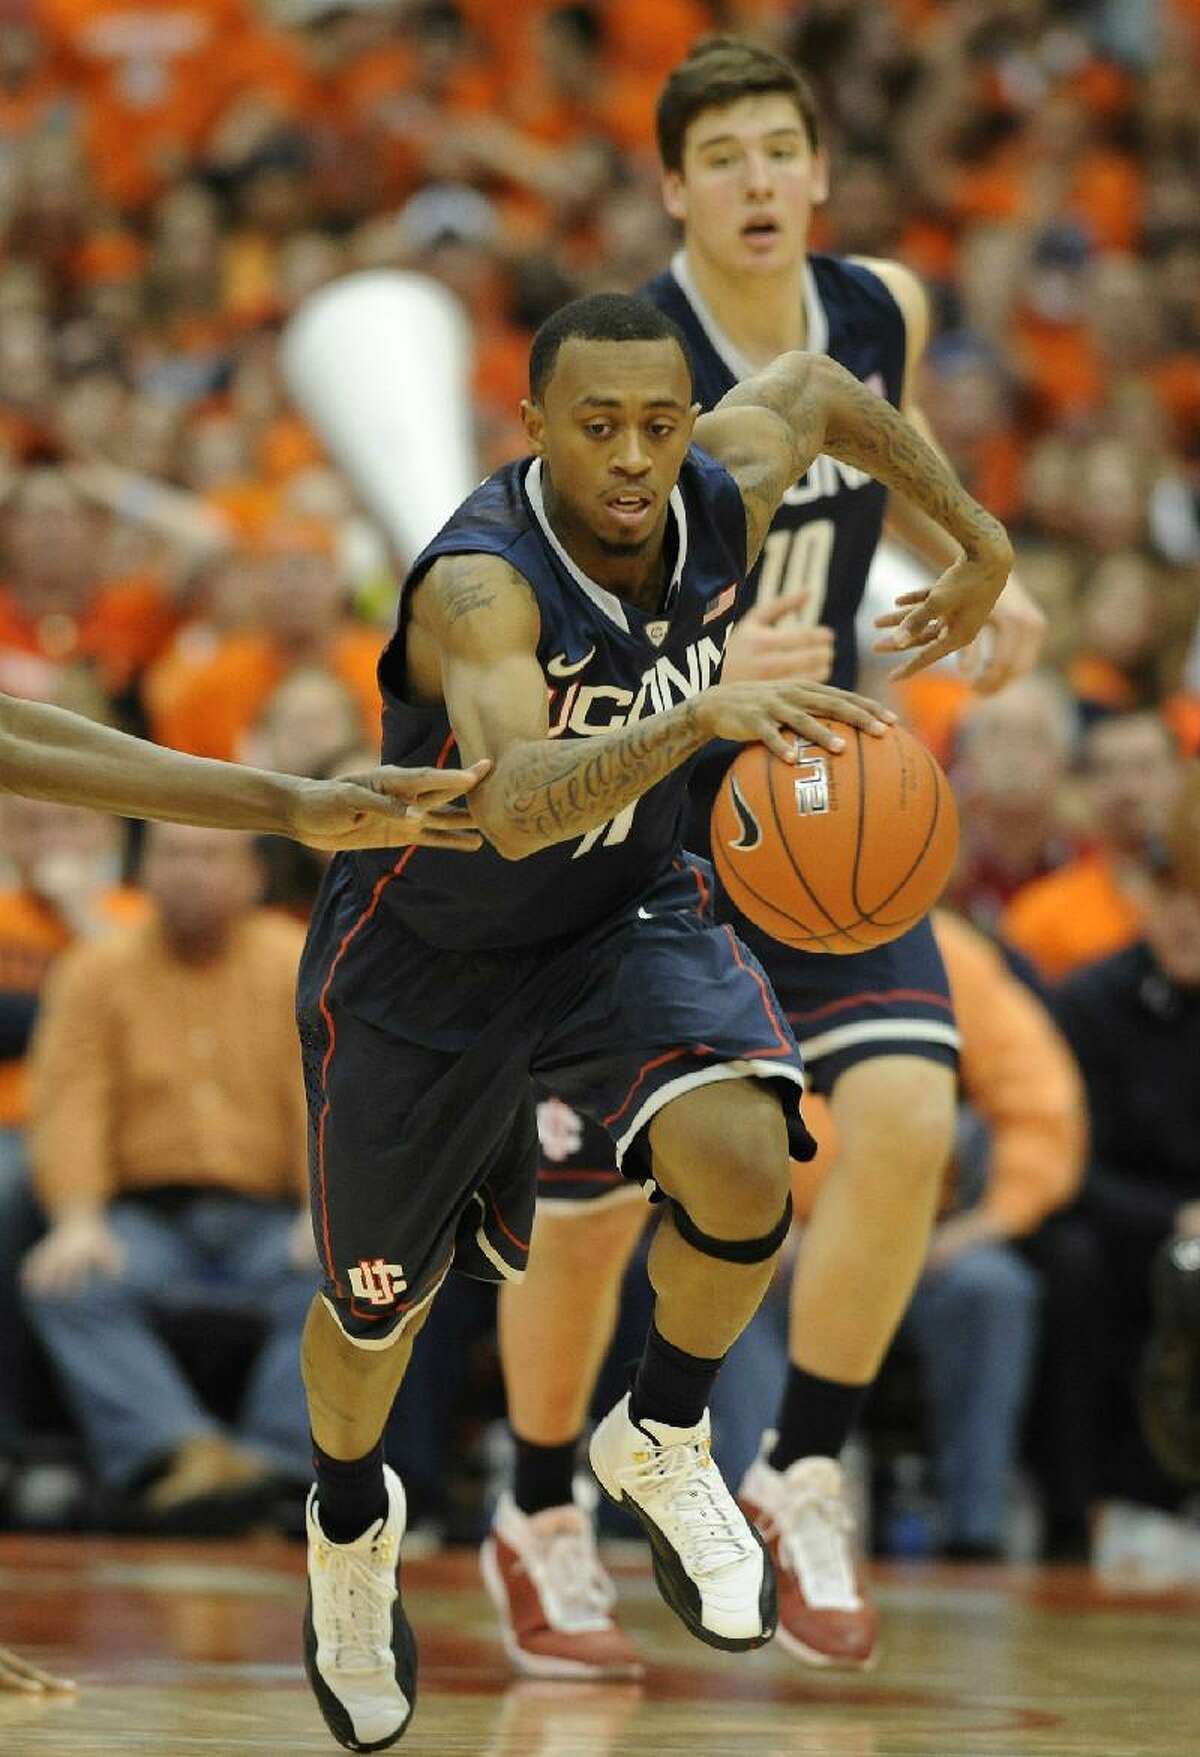 ASSOCIATED PRESS Connecticut's Ryan Boatright dribbles down the court during Saturday's game against Syracuse at the Carrier Dome in Syracuse, N.Y. The Huskies lost 85-67.